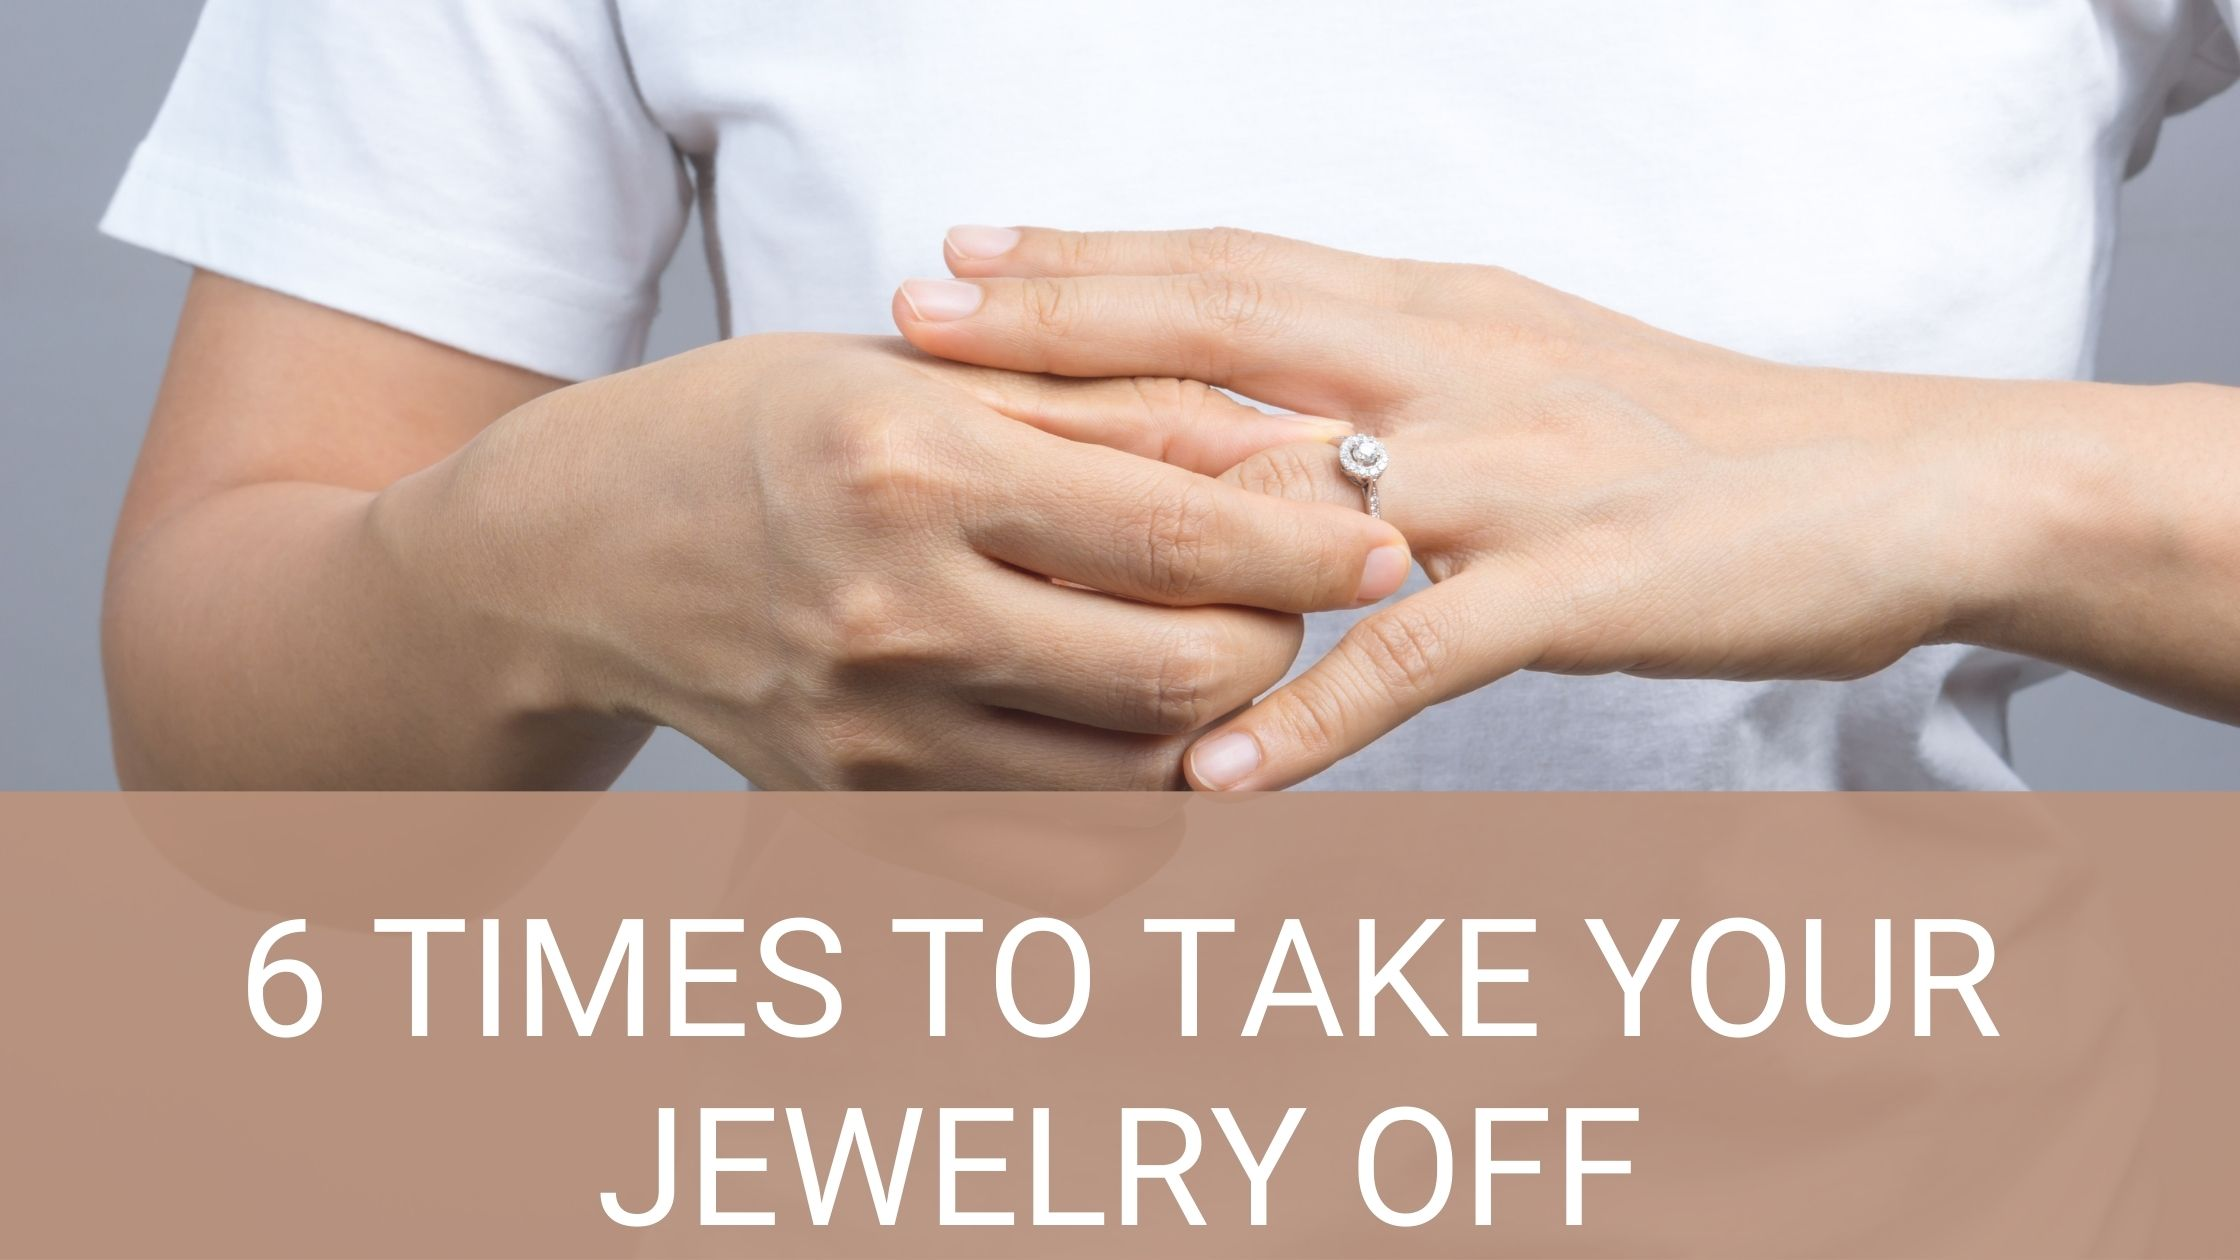 57% Of Brides Don't Love Their Wedding Rings, Here's How To Make Sure Your  Bride Does - Hellenic News of America